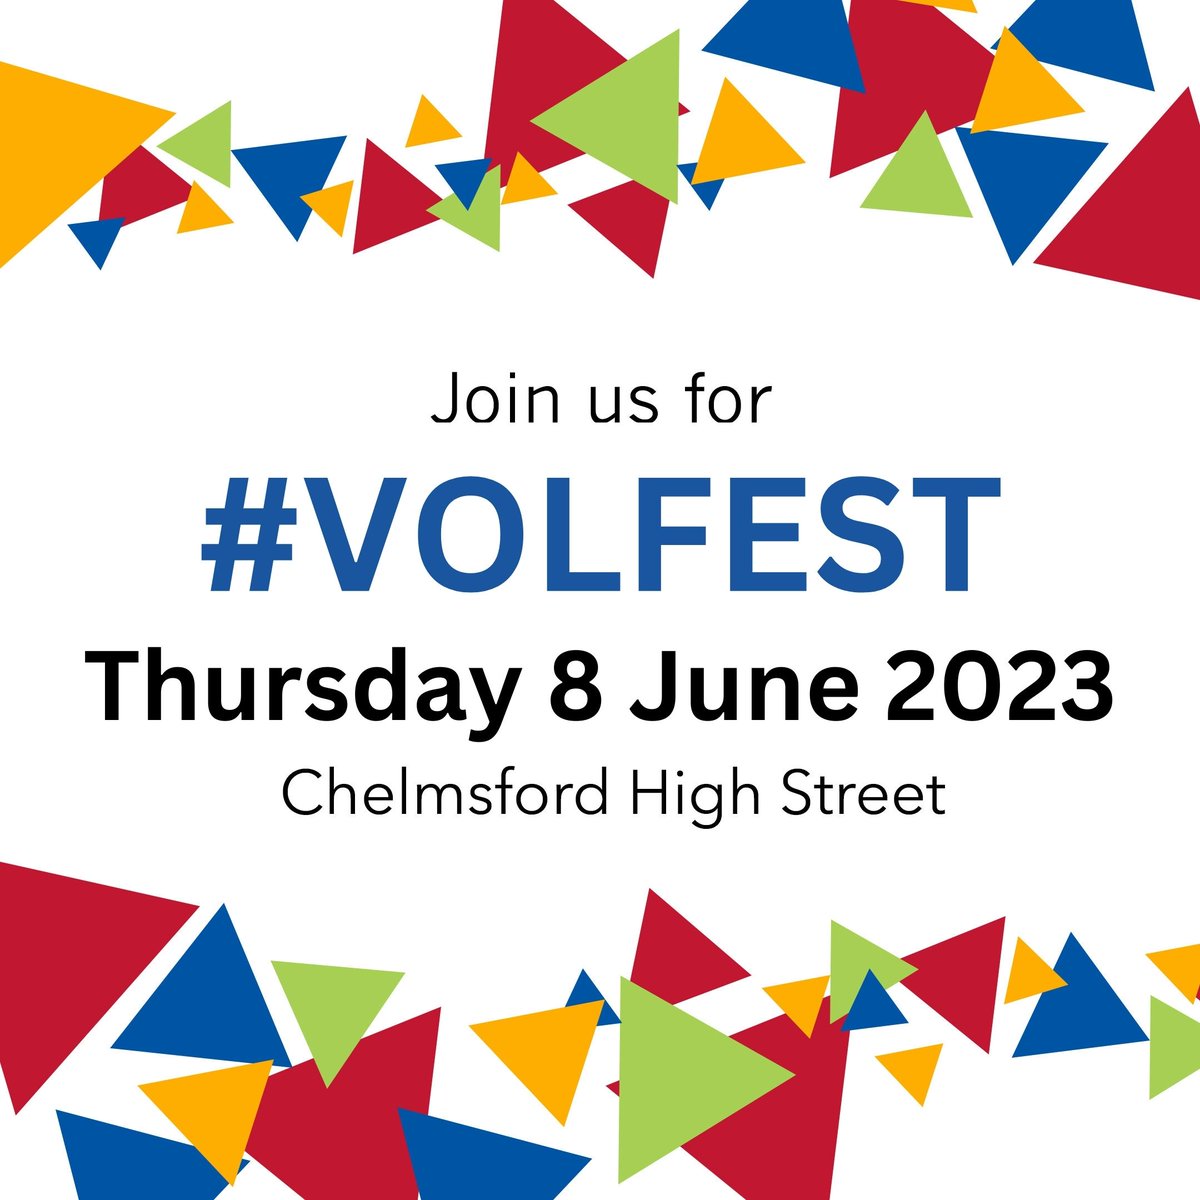 Today's the day! 

Please pop down to #Chelmsford high street to join in this years #VolFest 

@ChelmsfordCVS